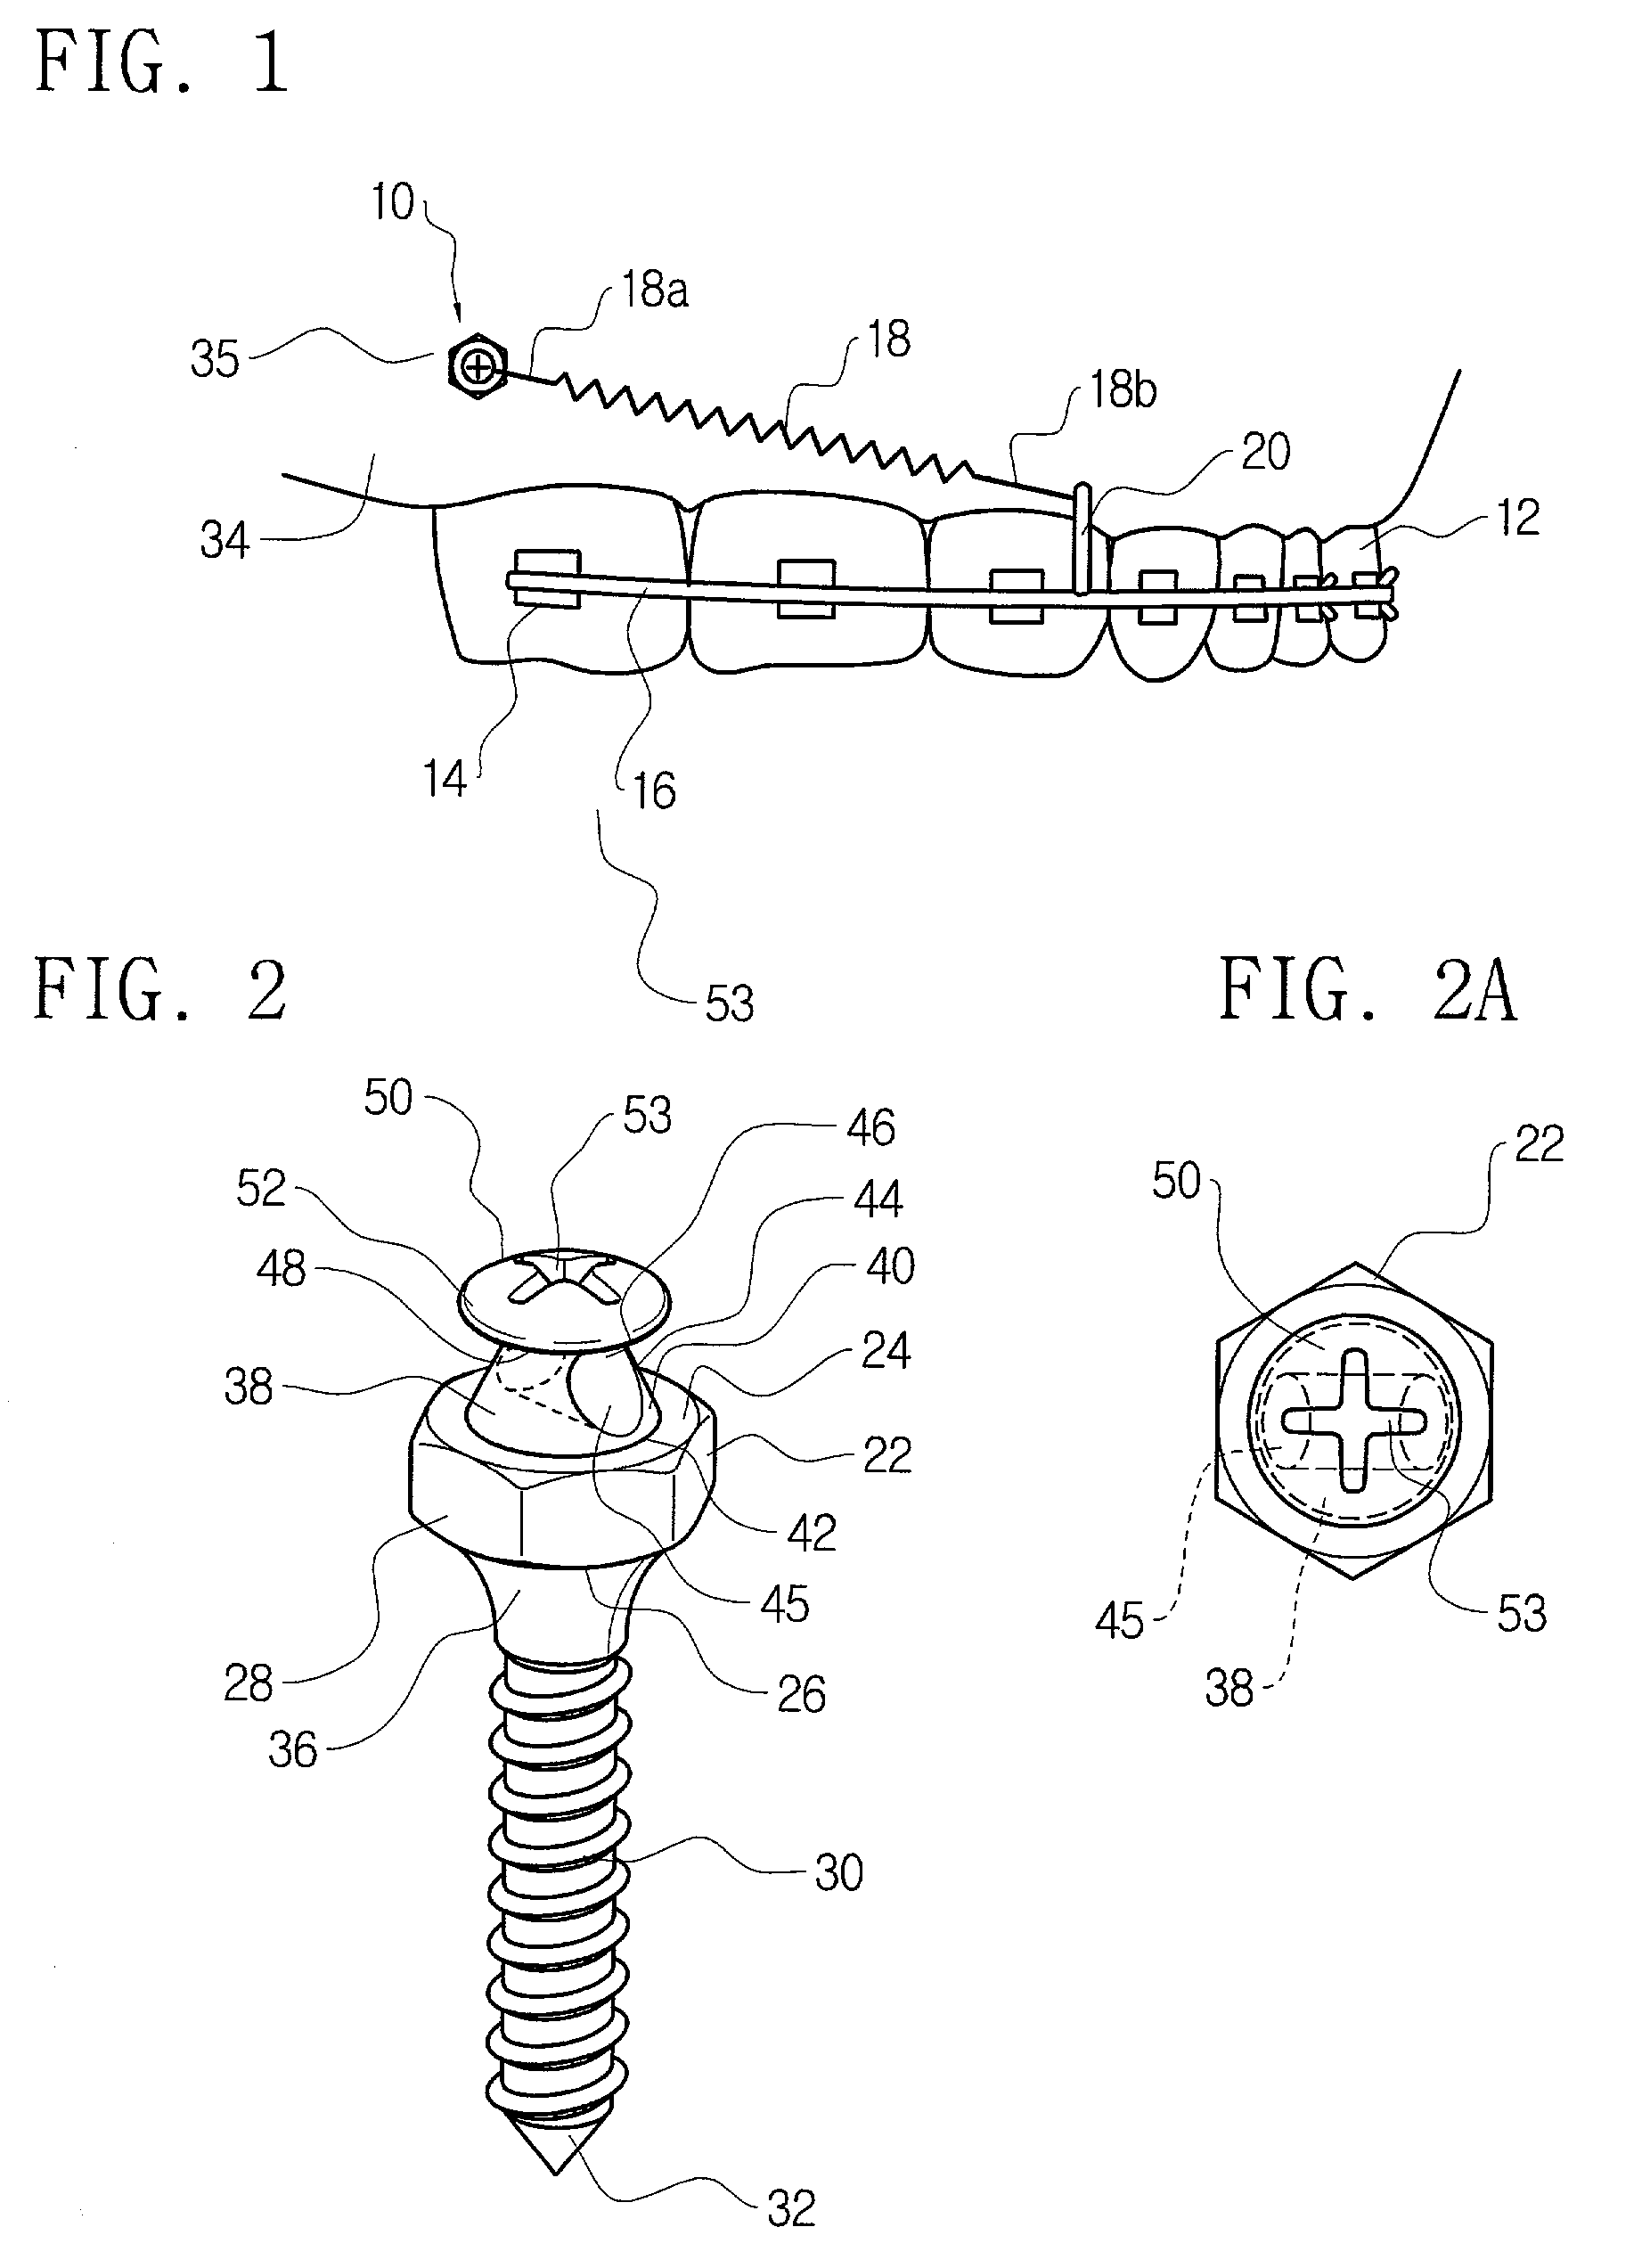 Osteogenic support device for orthodontic treatment